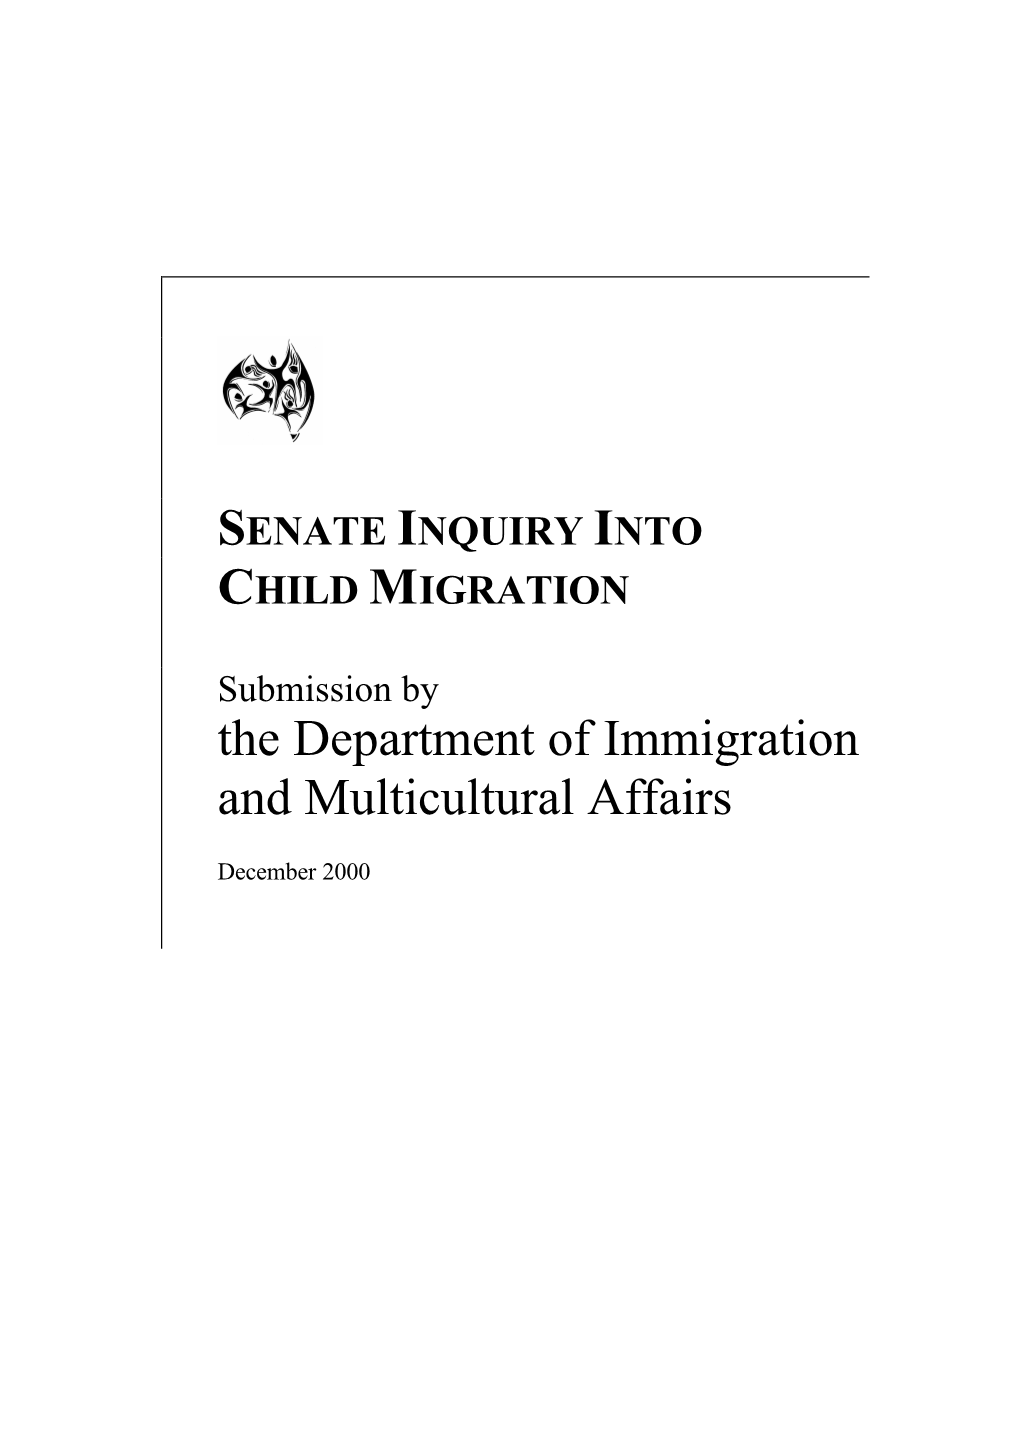 The Department of Immigration and Multicultural Affairs